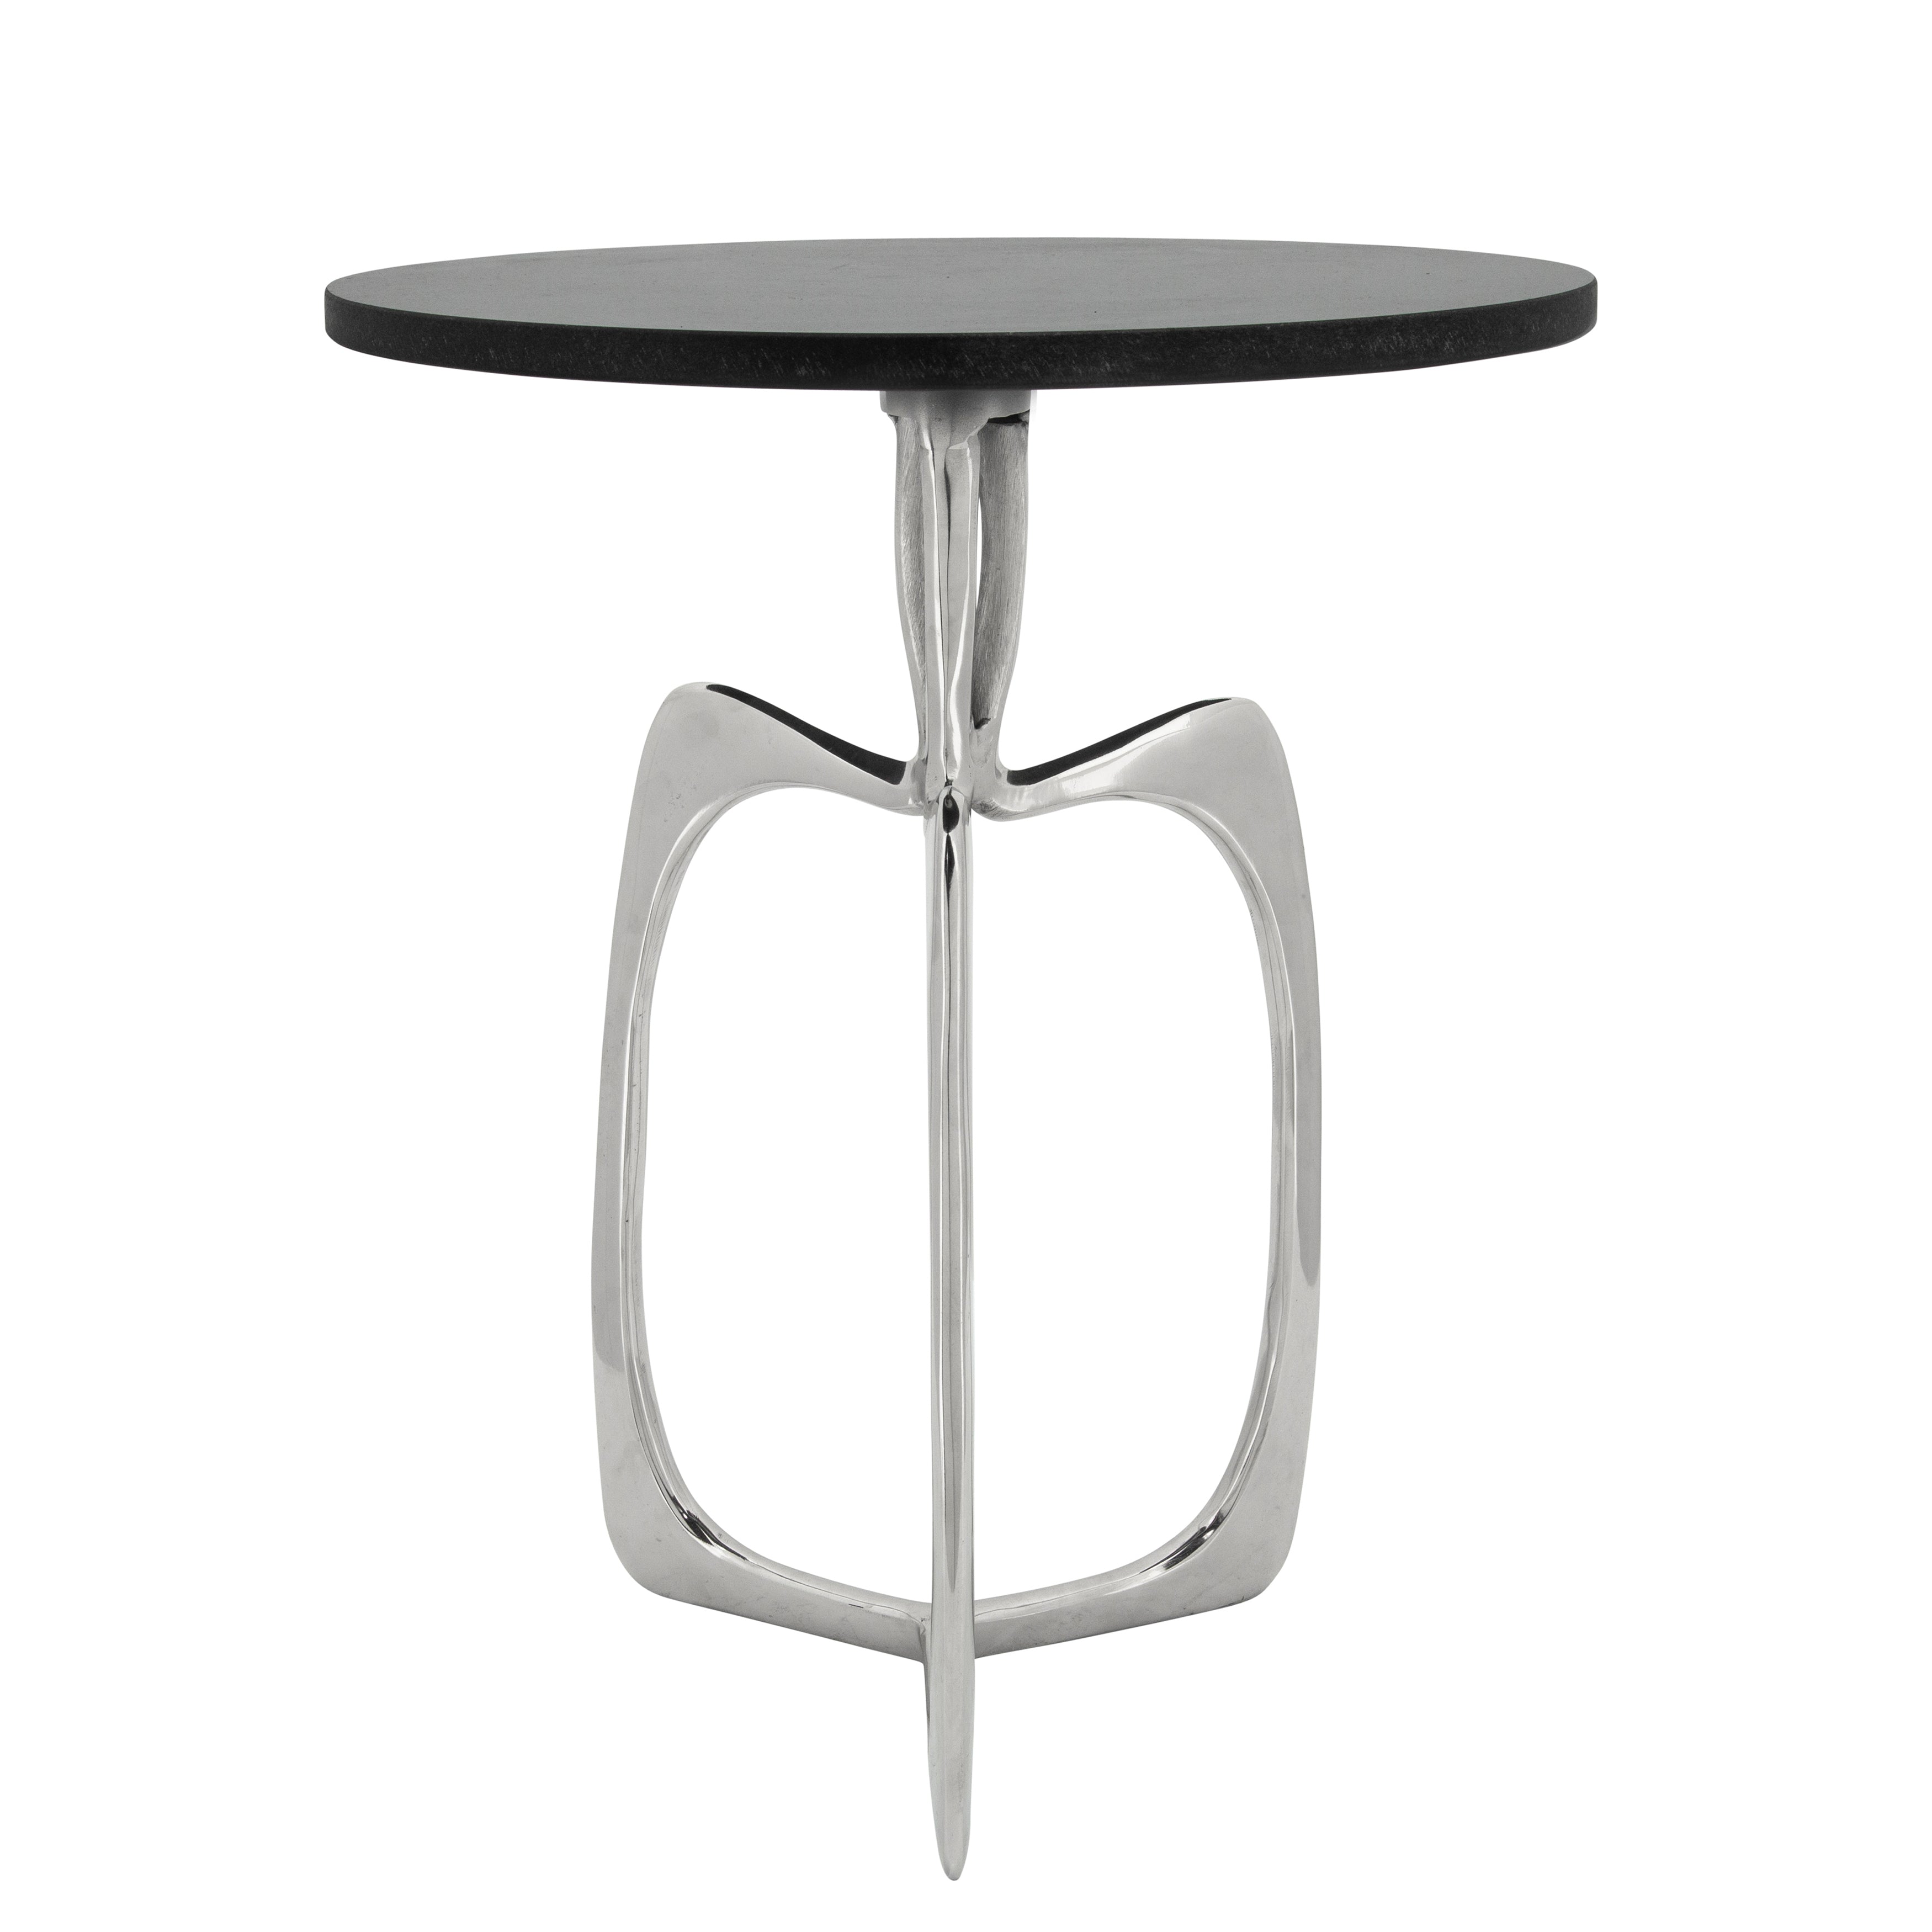 20" Accent Table W/ Black Marble, Nickel